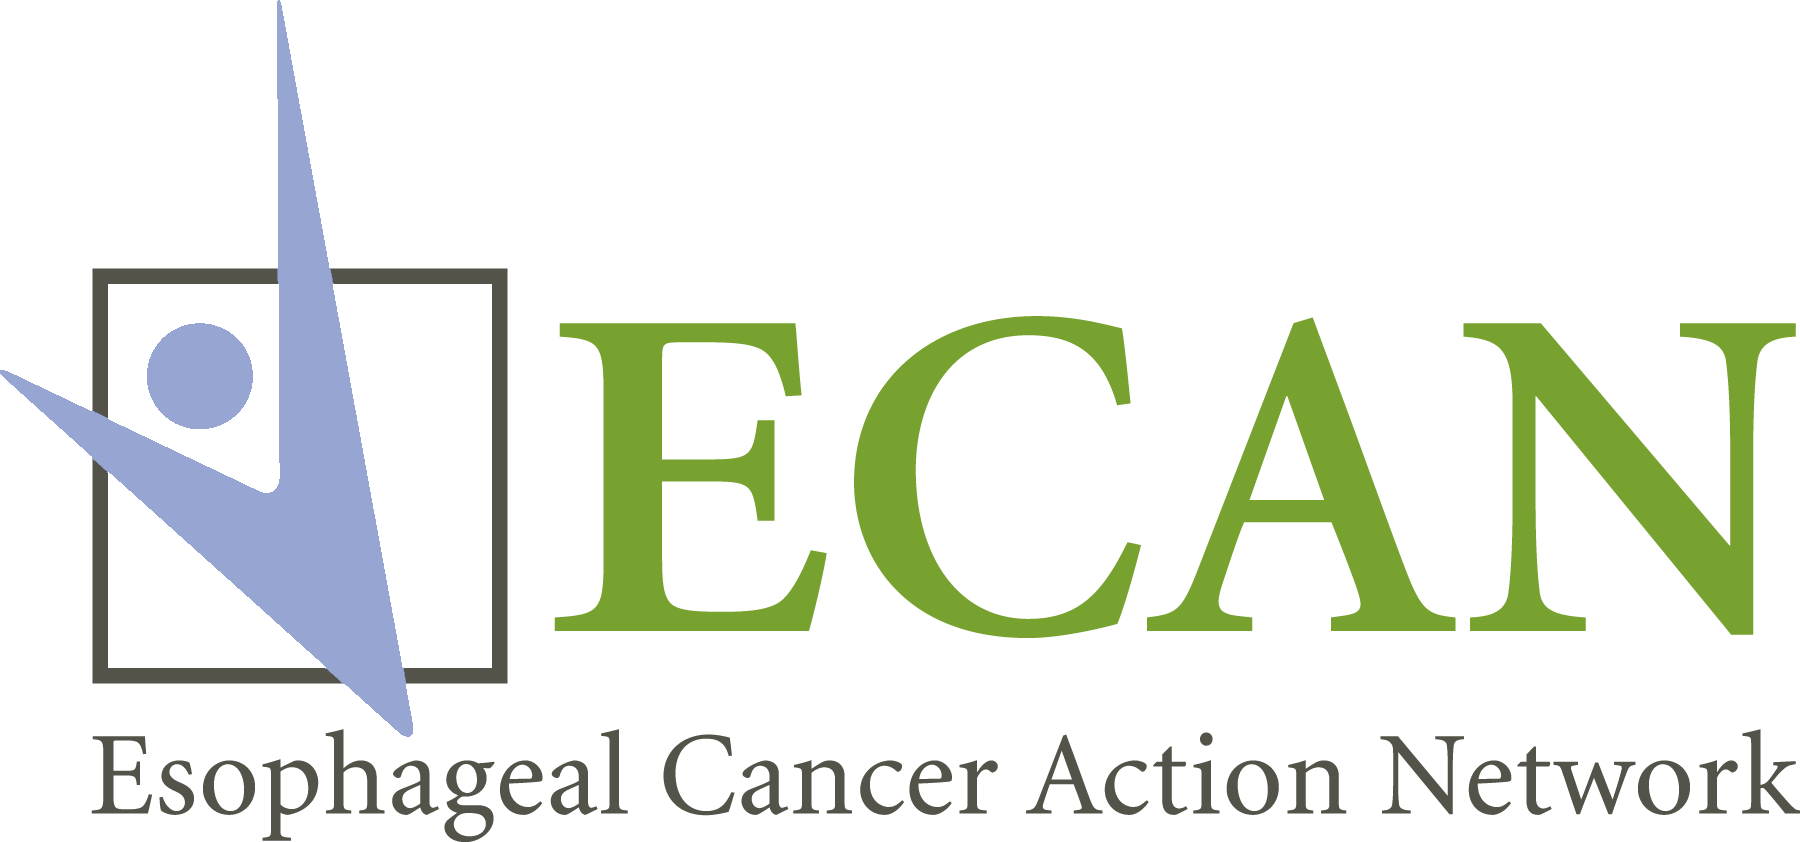 Esophageal Cancer Action Network